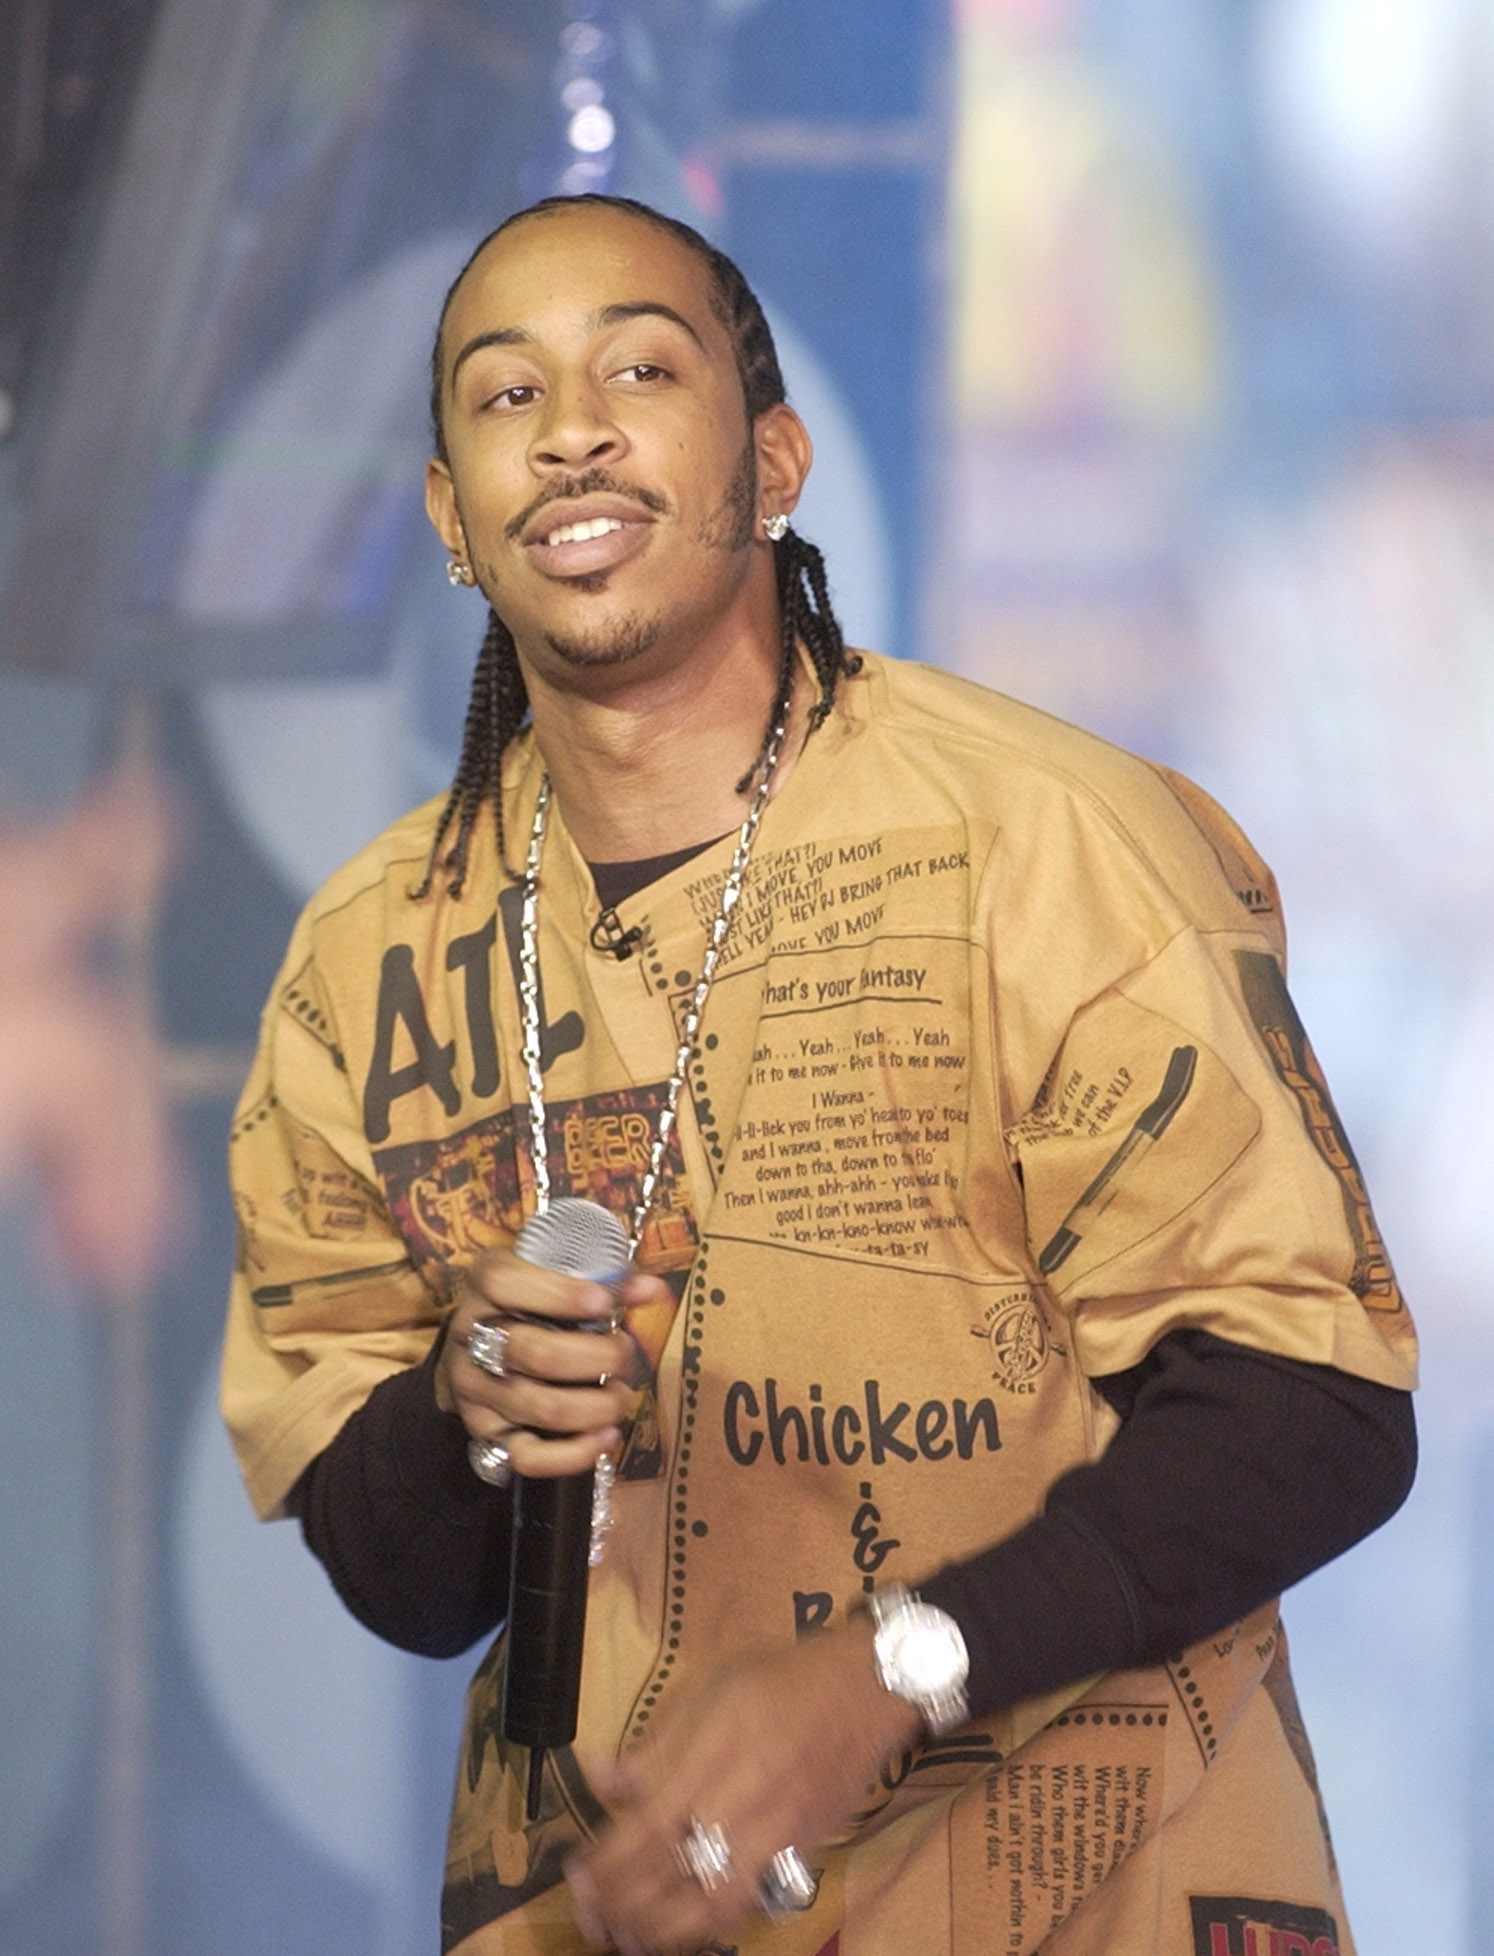 Ludacris Visits MTV's TRL to Promote His New CD "Chicken and Beer" - October 7, 2003